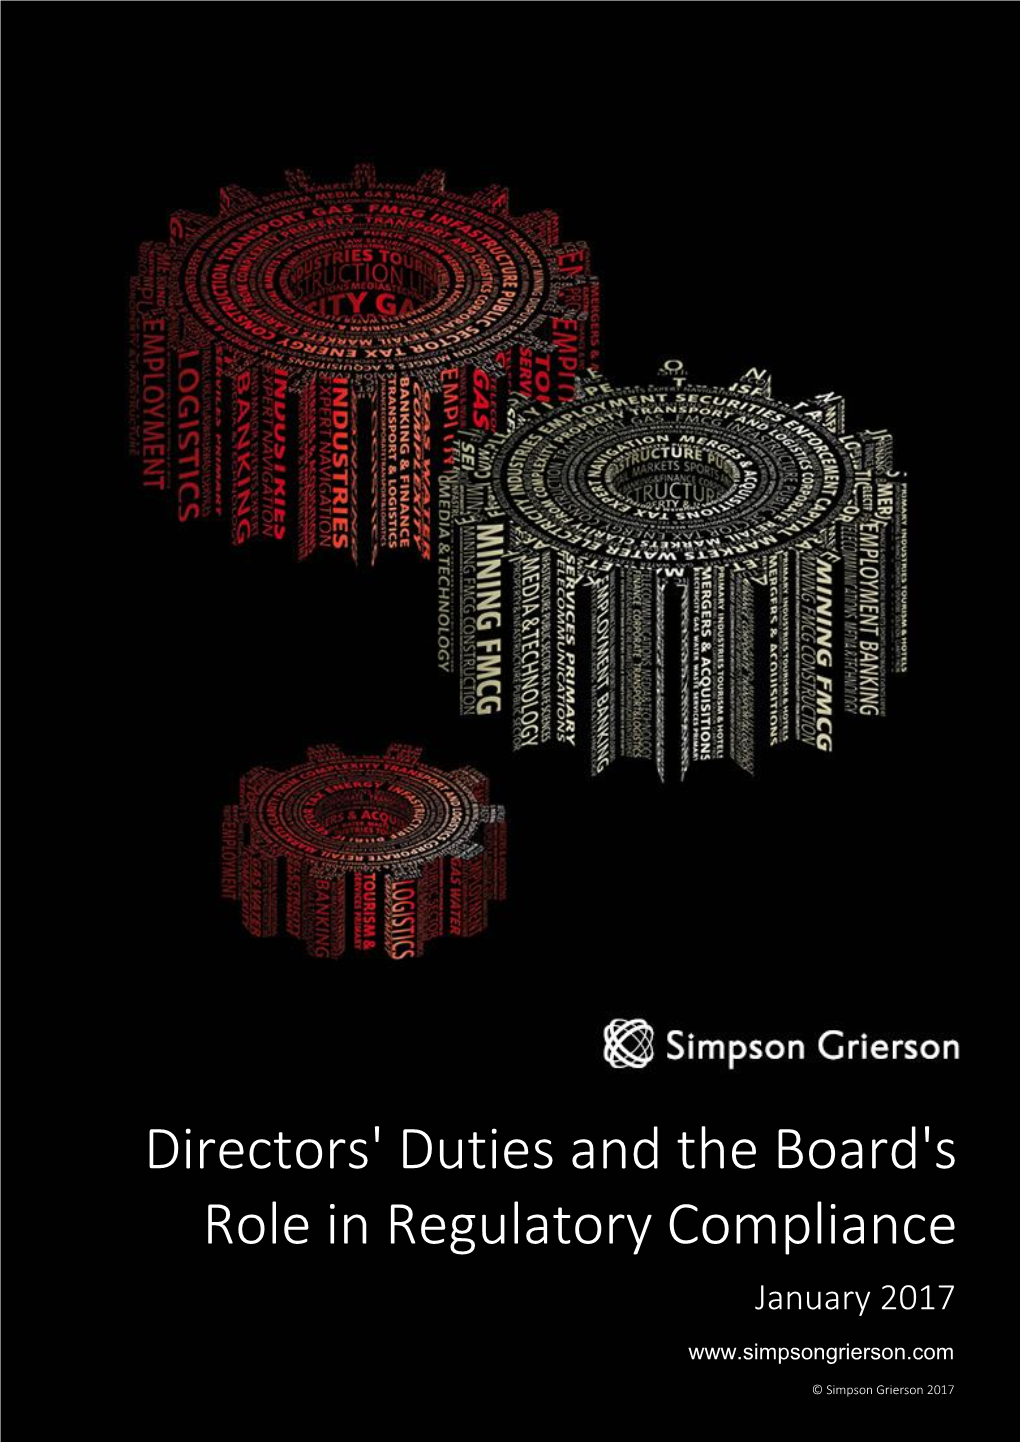 Directors' Duties and the Board's Role in Regulatory Compliance Guide